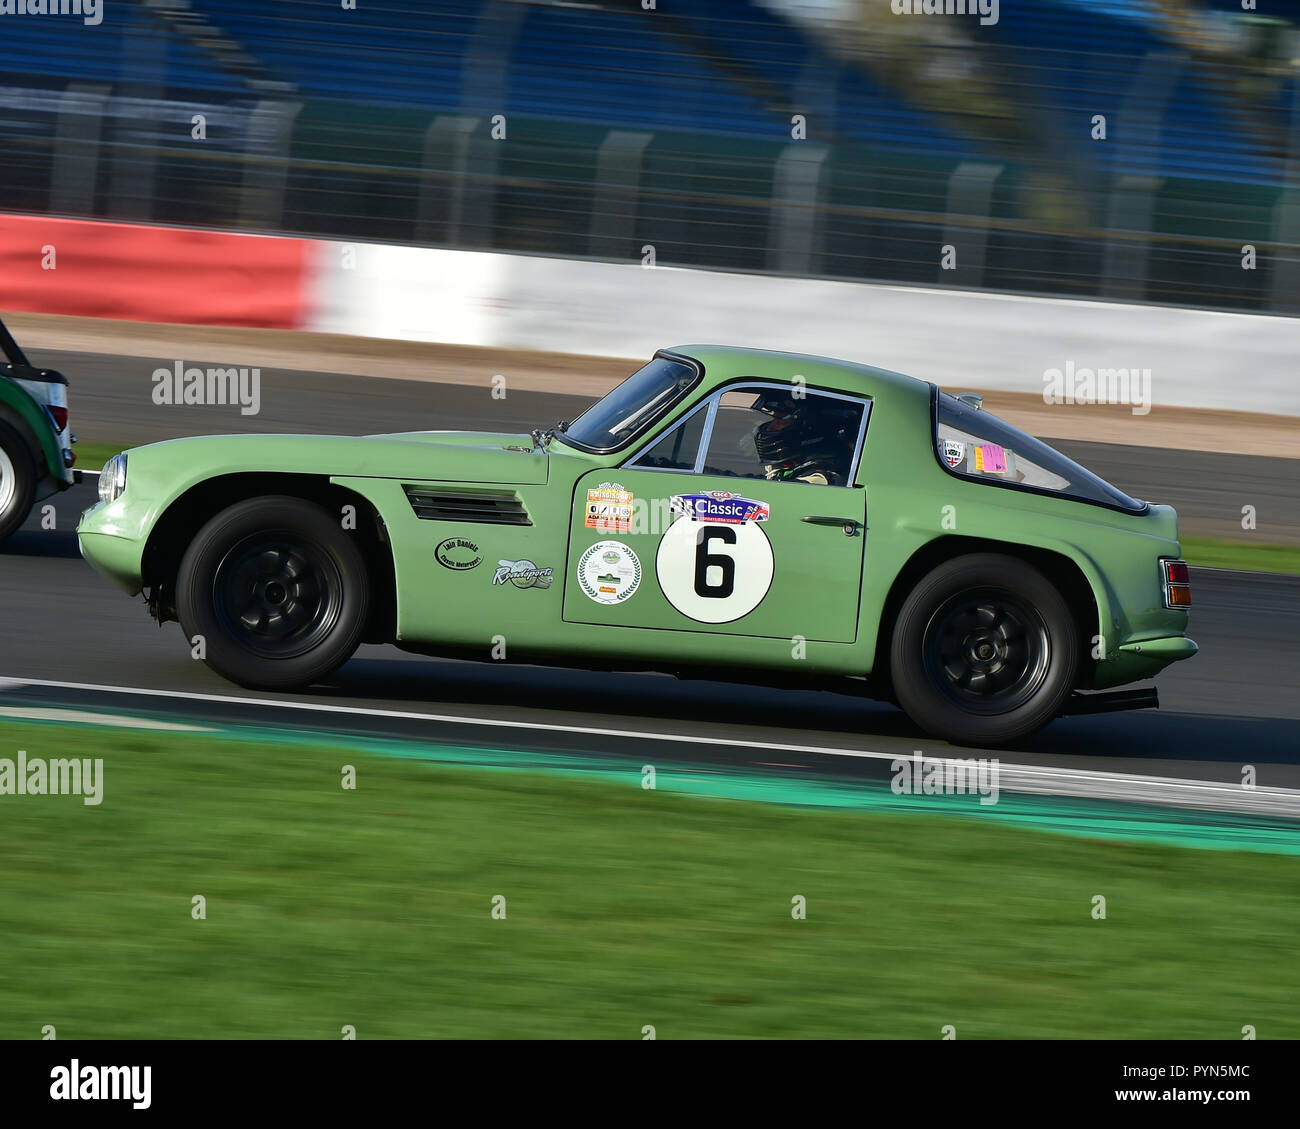 Johan Denekamp, TVR Tuscan, Historic Road Sports, Silverstone Finals Historic Race Meeting, Silverstone, October 2018, cars, Classic Racing Cars, Hist Stock Photo